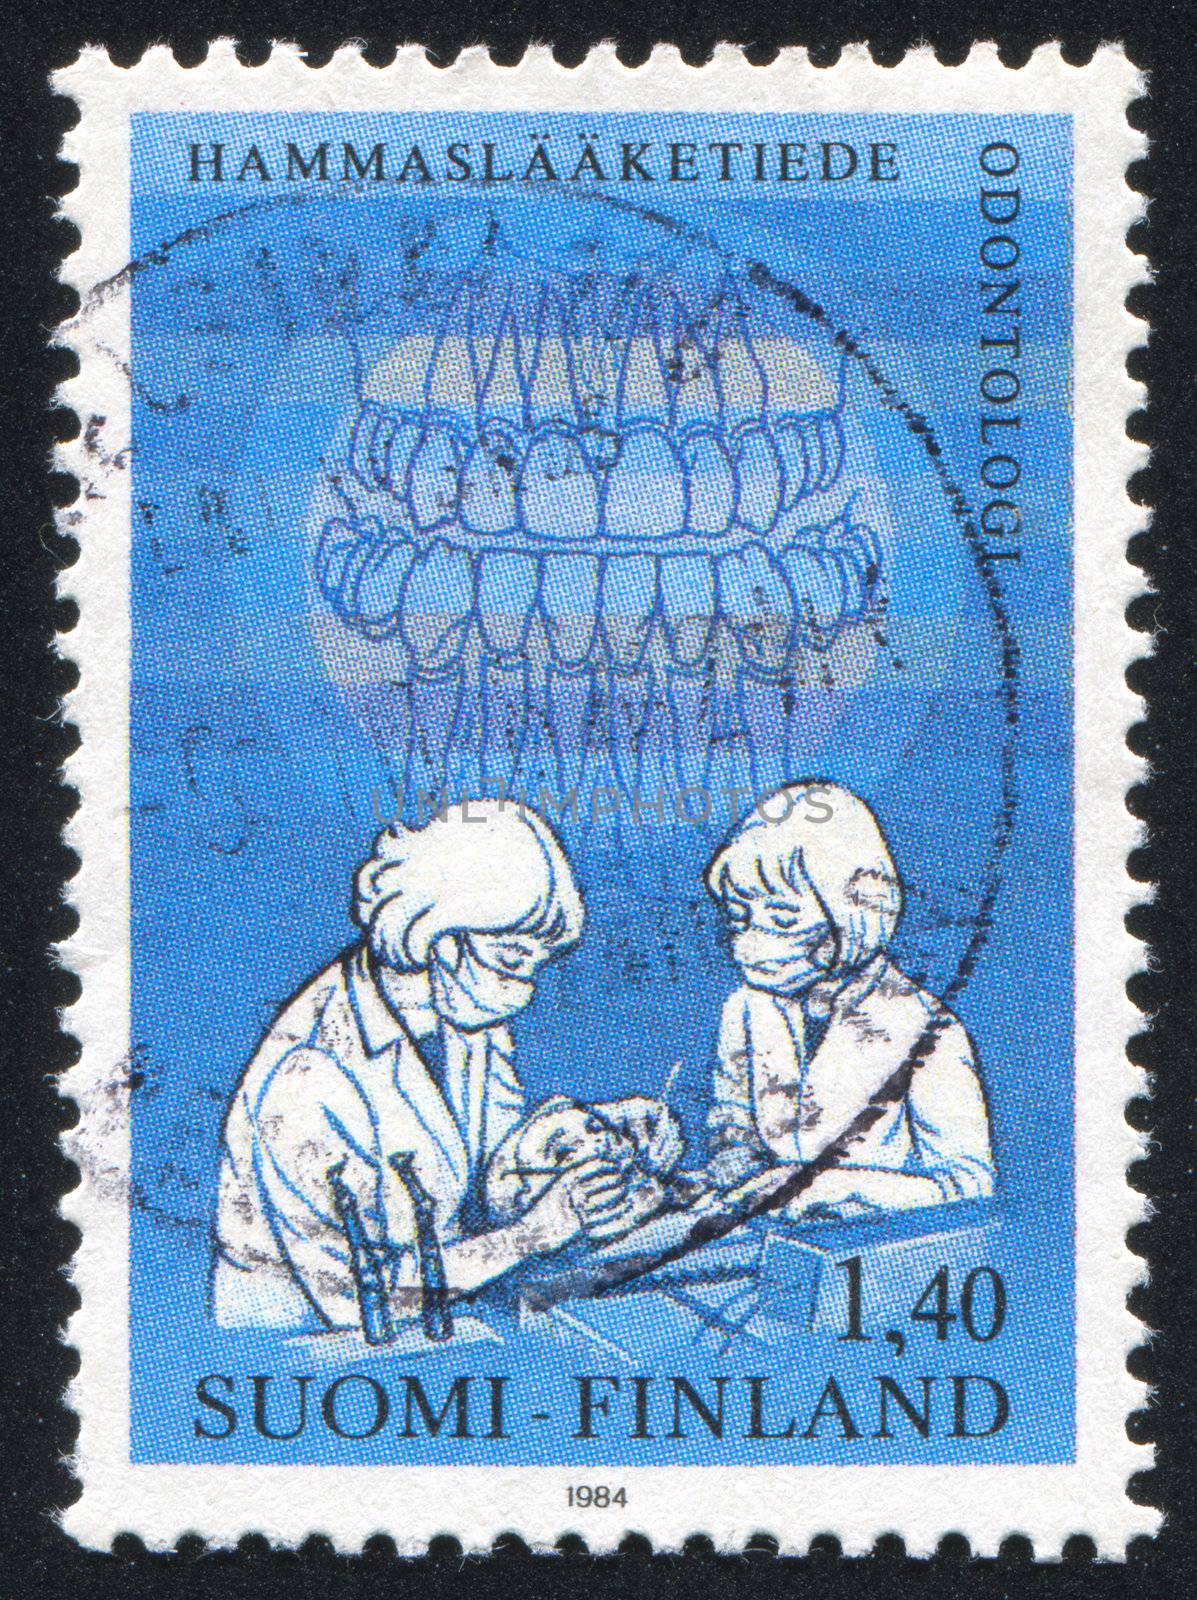 Dentists Examining Patient by rook